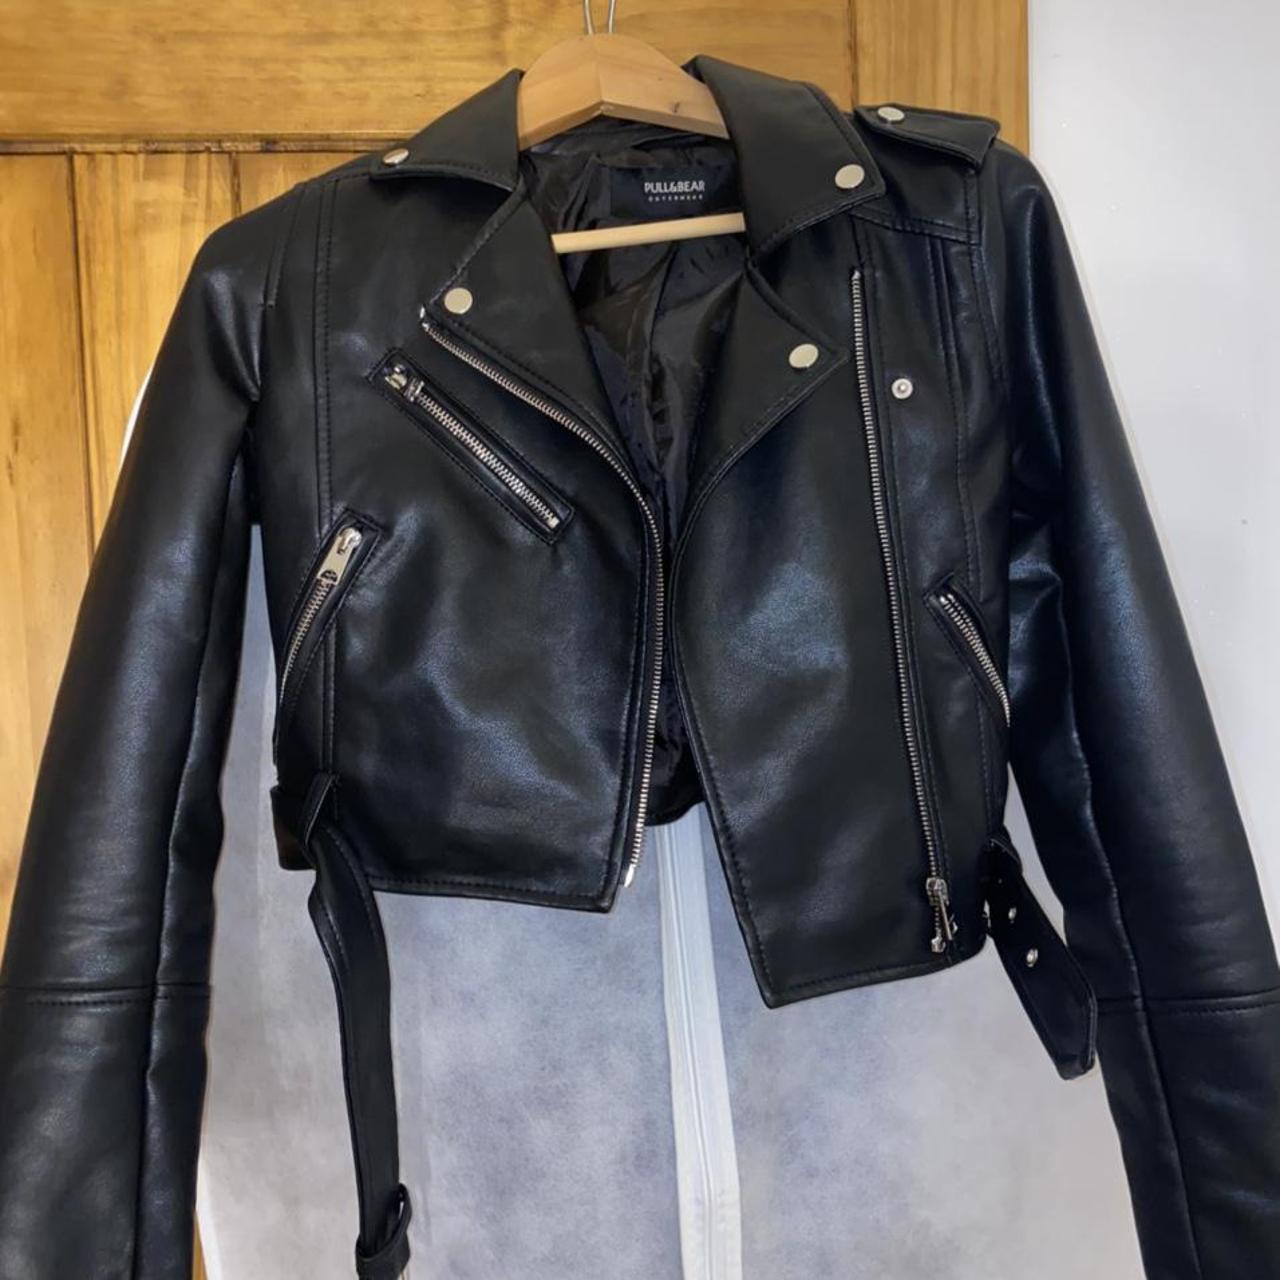 Pull and bear black leather jacket, only worn a... - Depop